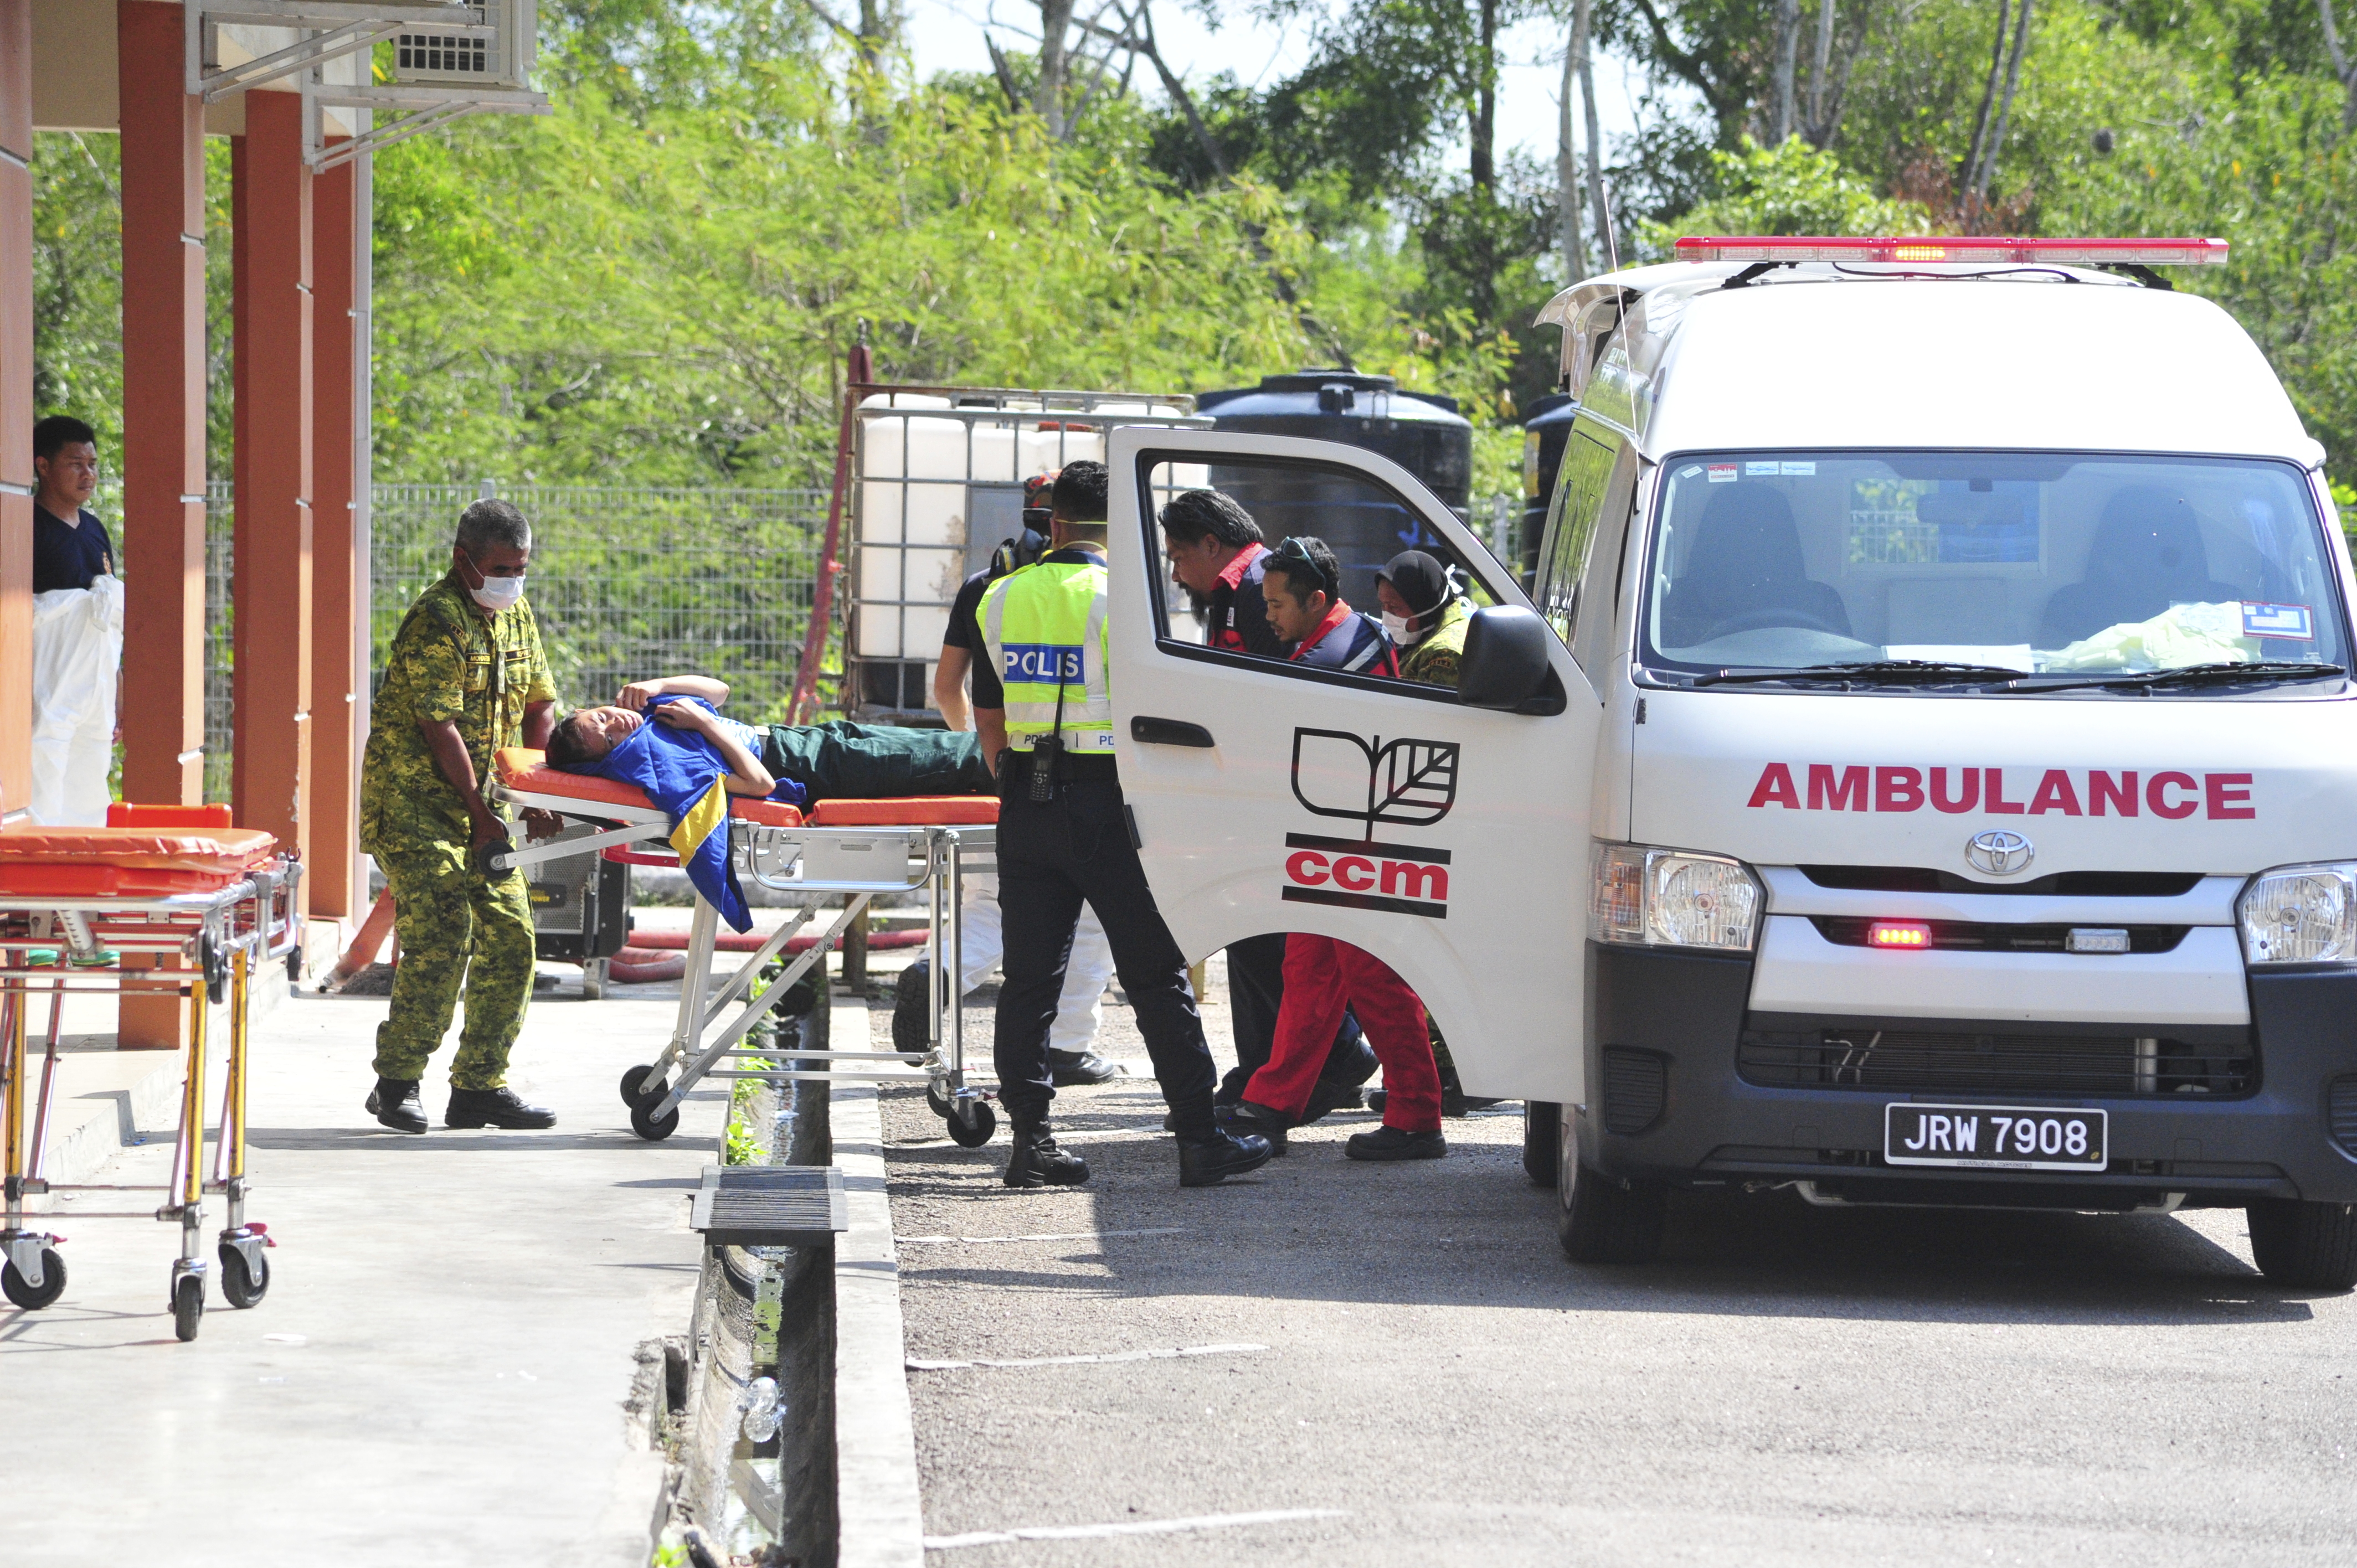 Emergency personnel unload a student from an ambulance after toxic chemical spill in Pasir Gudang, Johor state on Mar. 13, 2019. (Thomas Yong&mdash;AP)